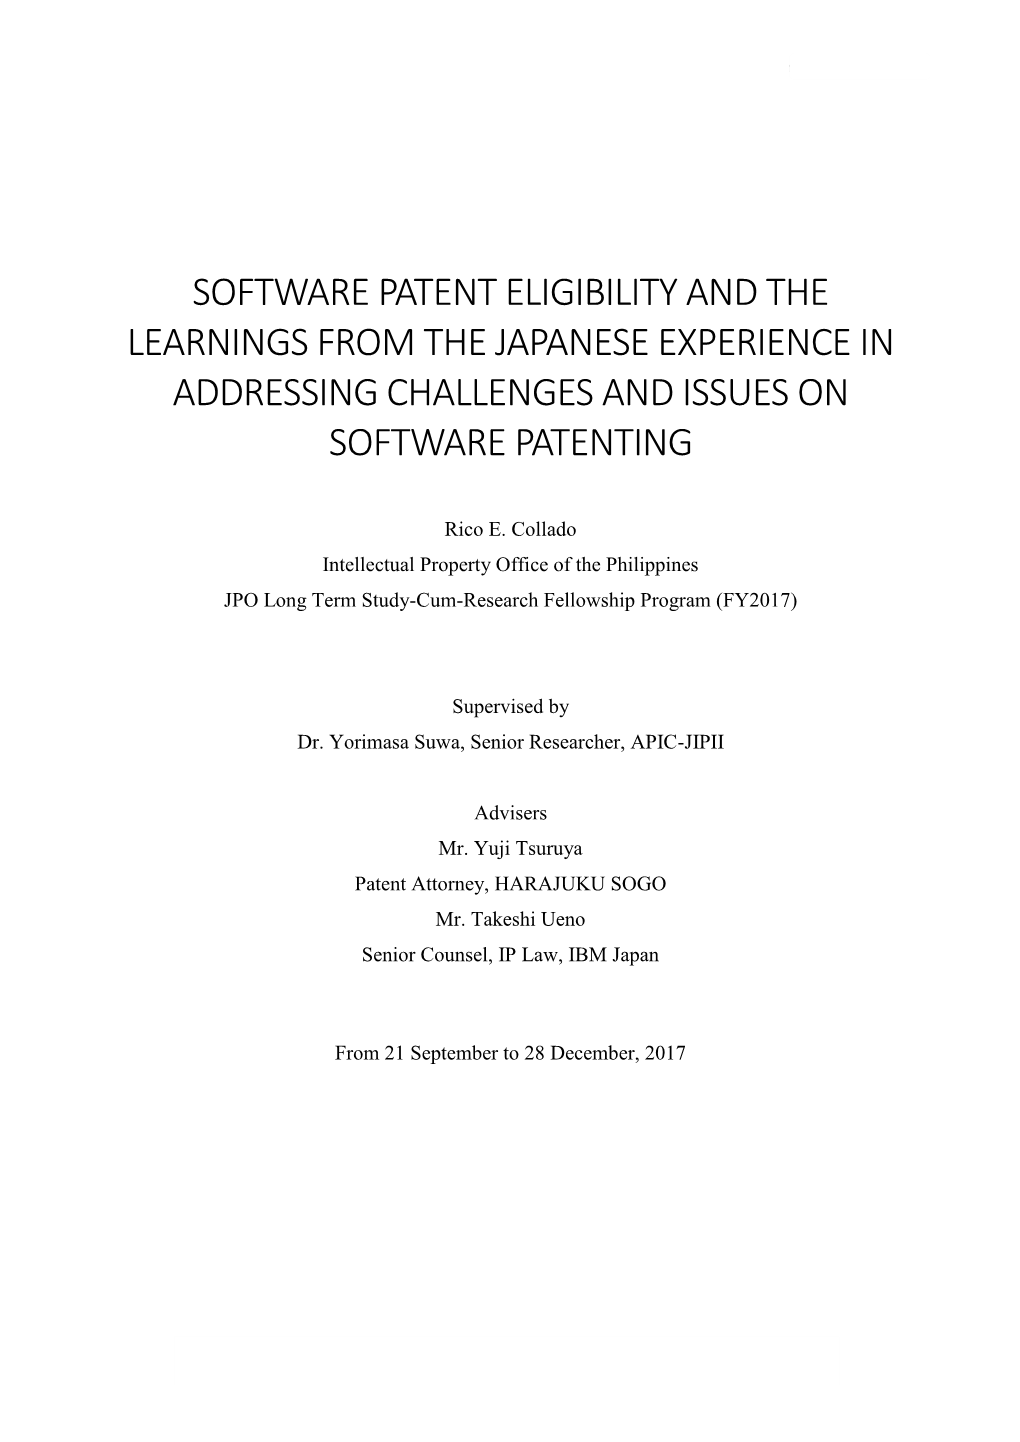 Software Patent Eligibility and the Learnings from the Japanese Experience in Addressing Challenges and Issues on Software Patenting